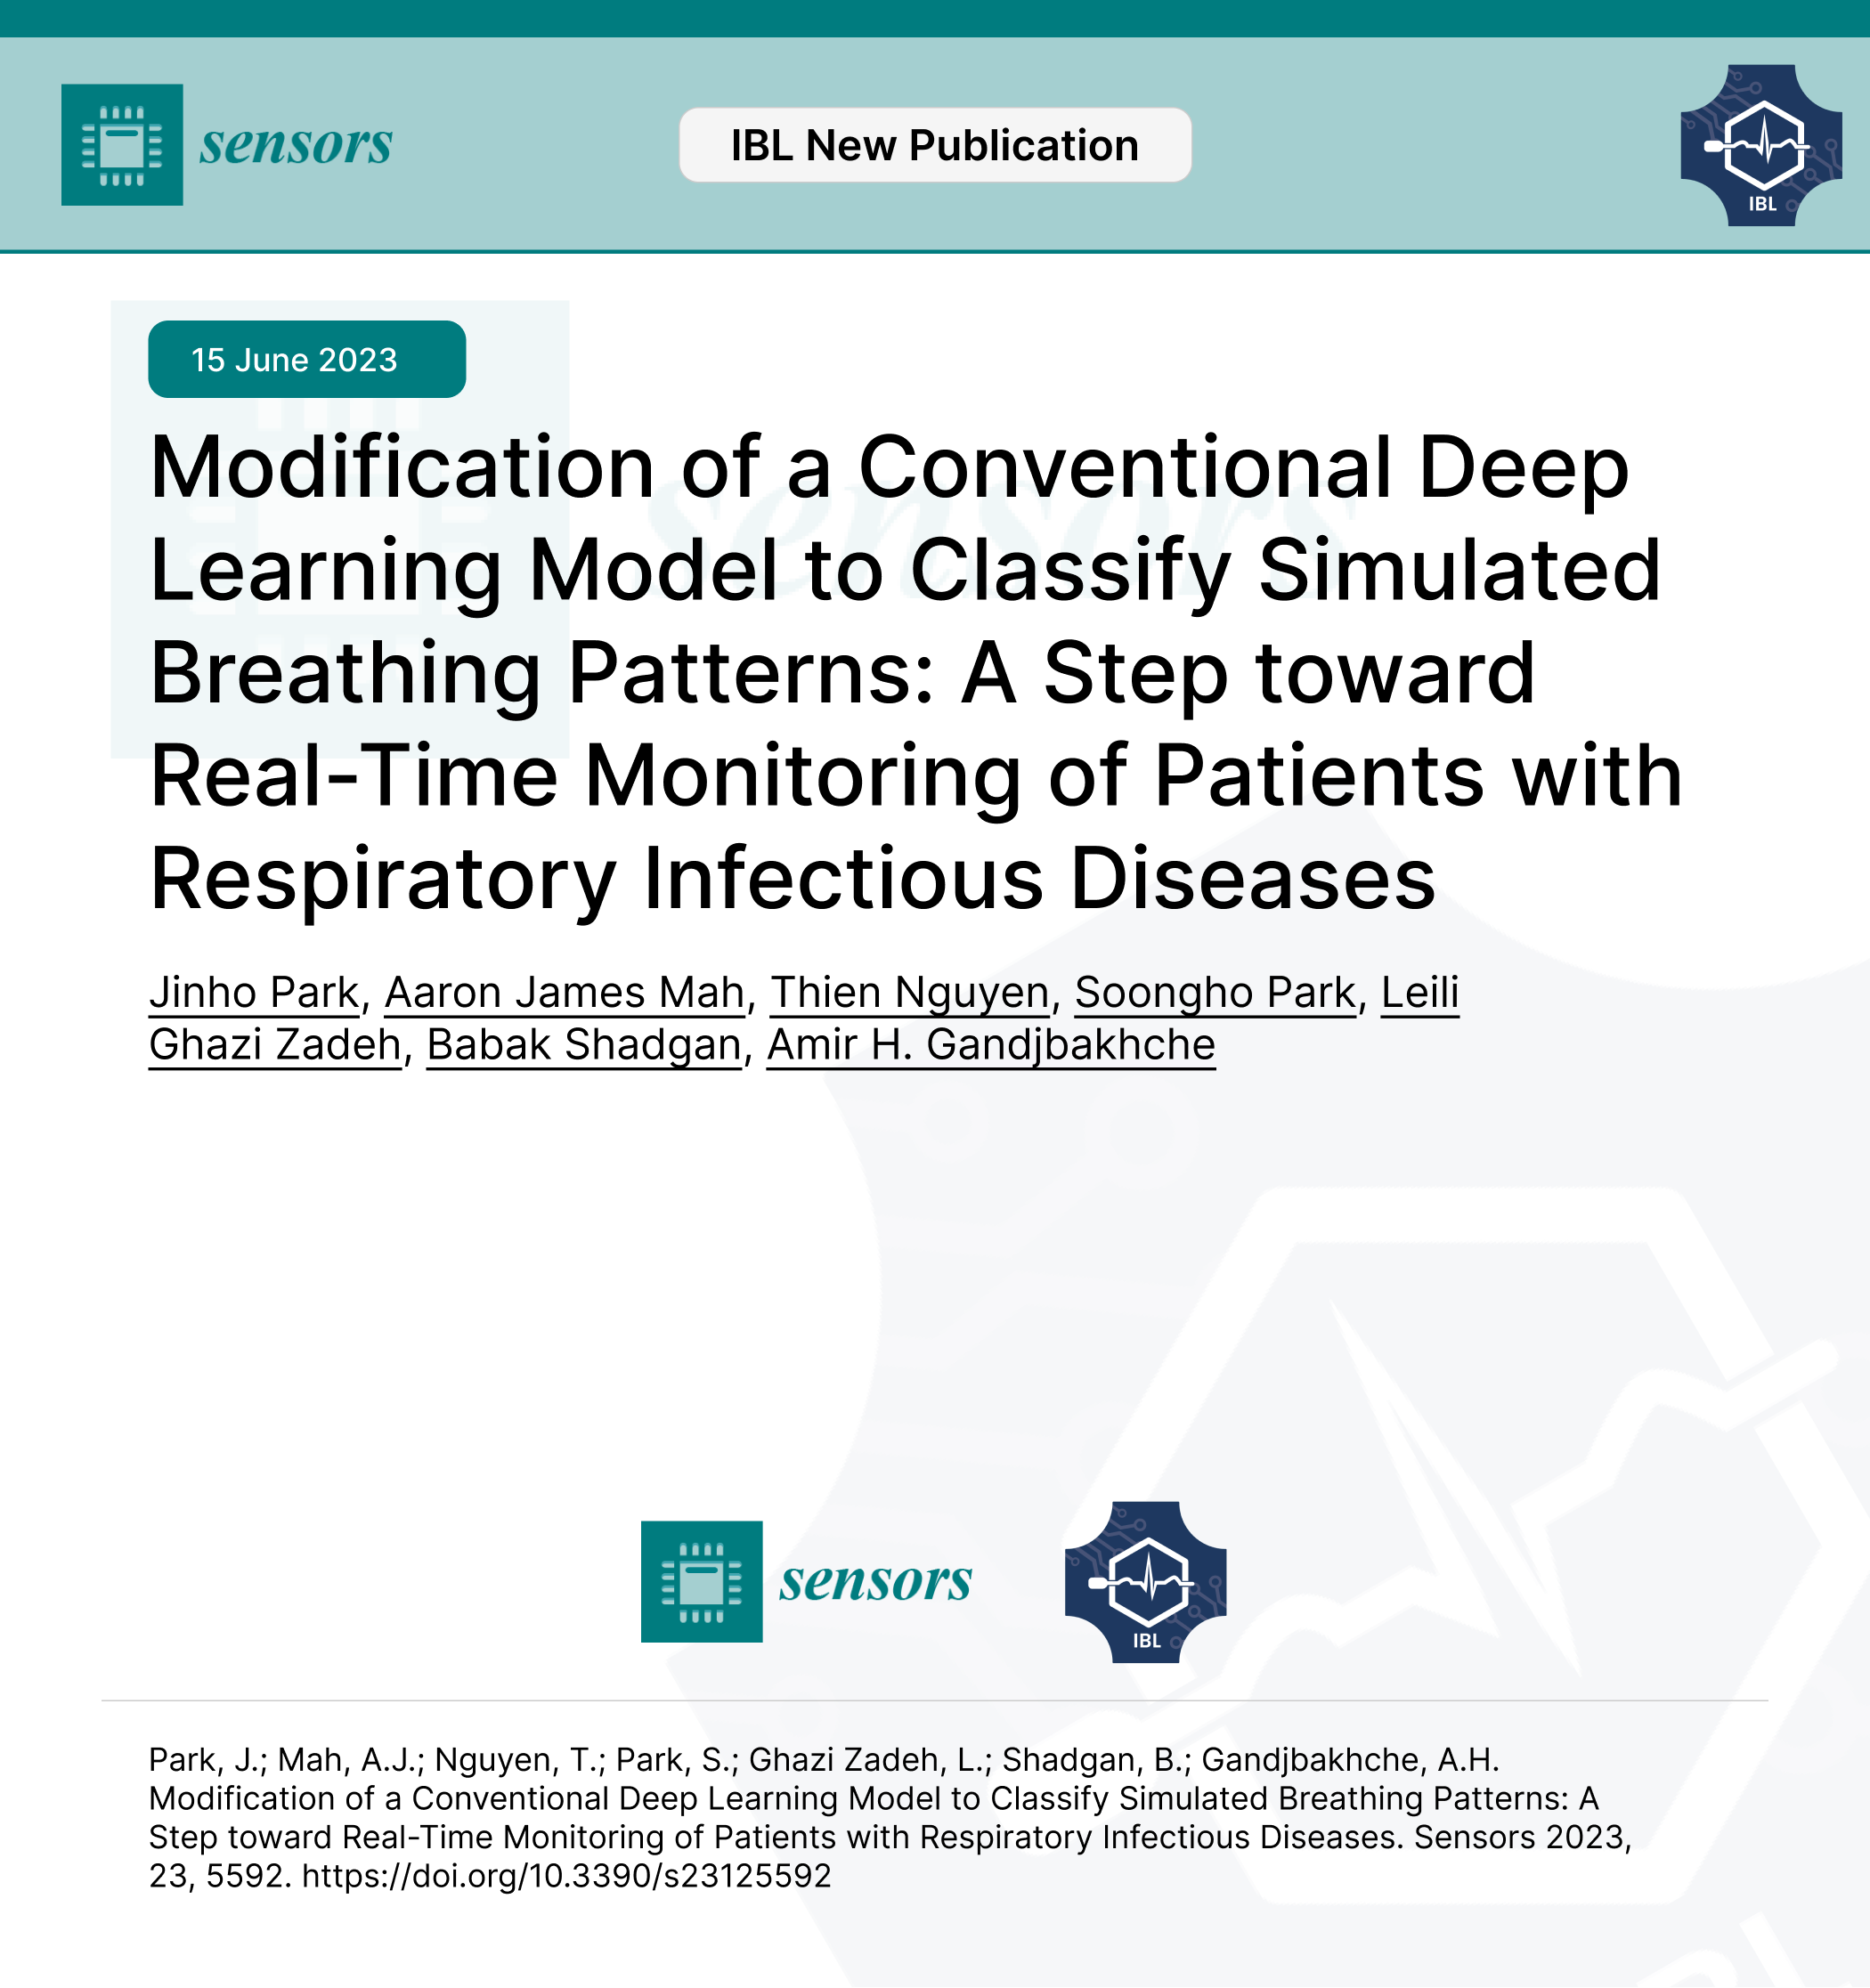 New Publication: Modification of a Conventional Deep Learning Model to Classify Simulated Breathing Patterns: A Step toward Real-Time Monitoring of Patients with Respiratory Infectious Diseases